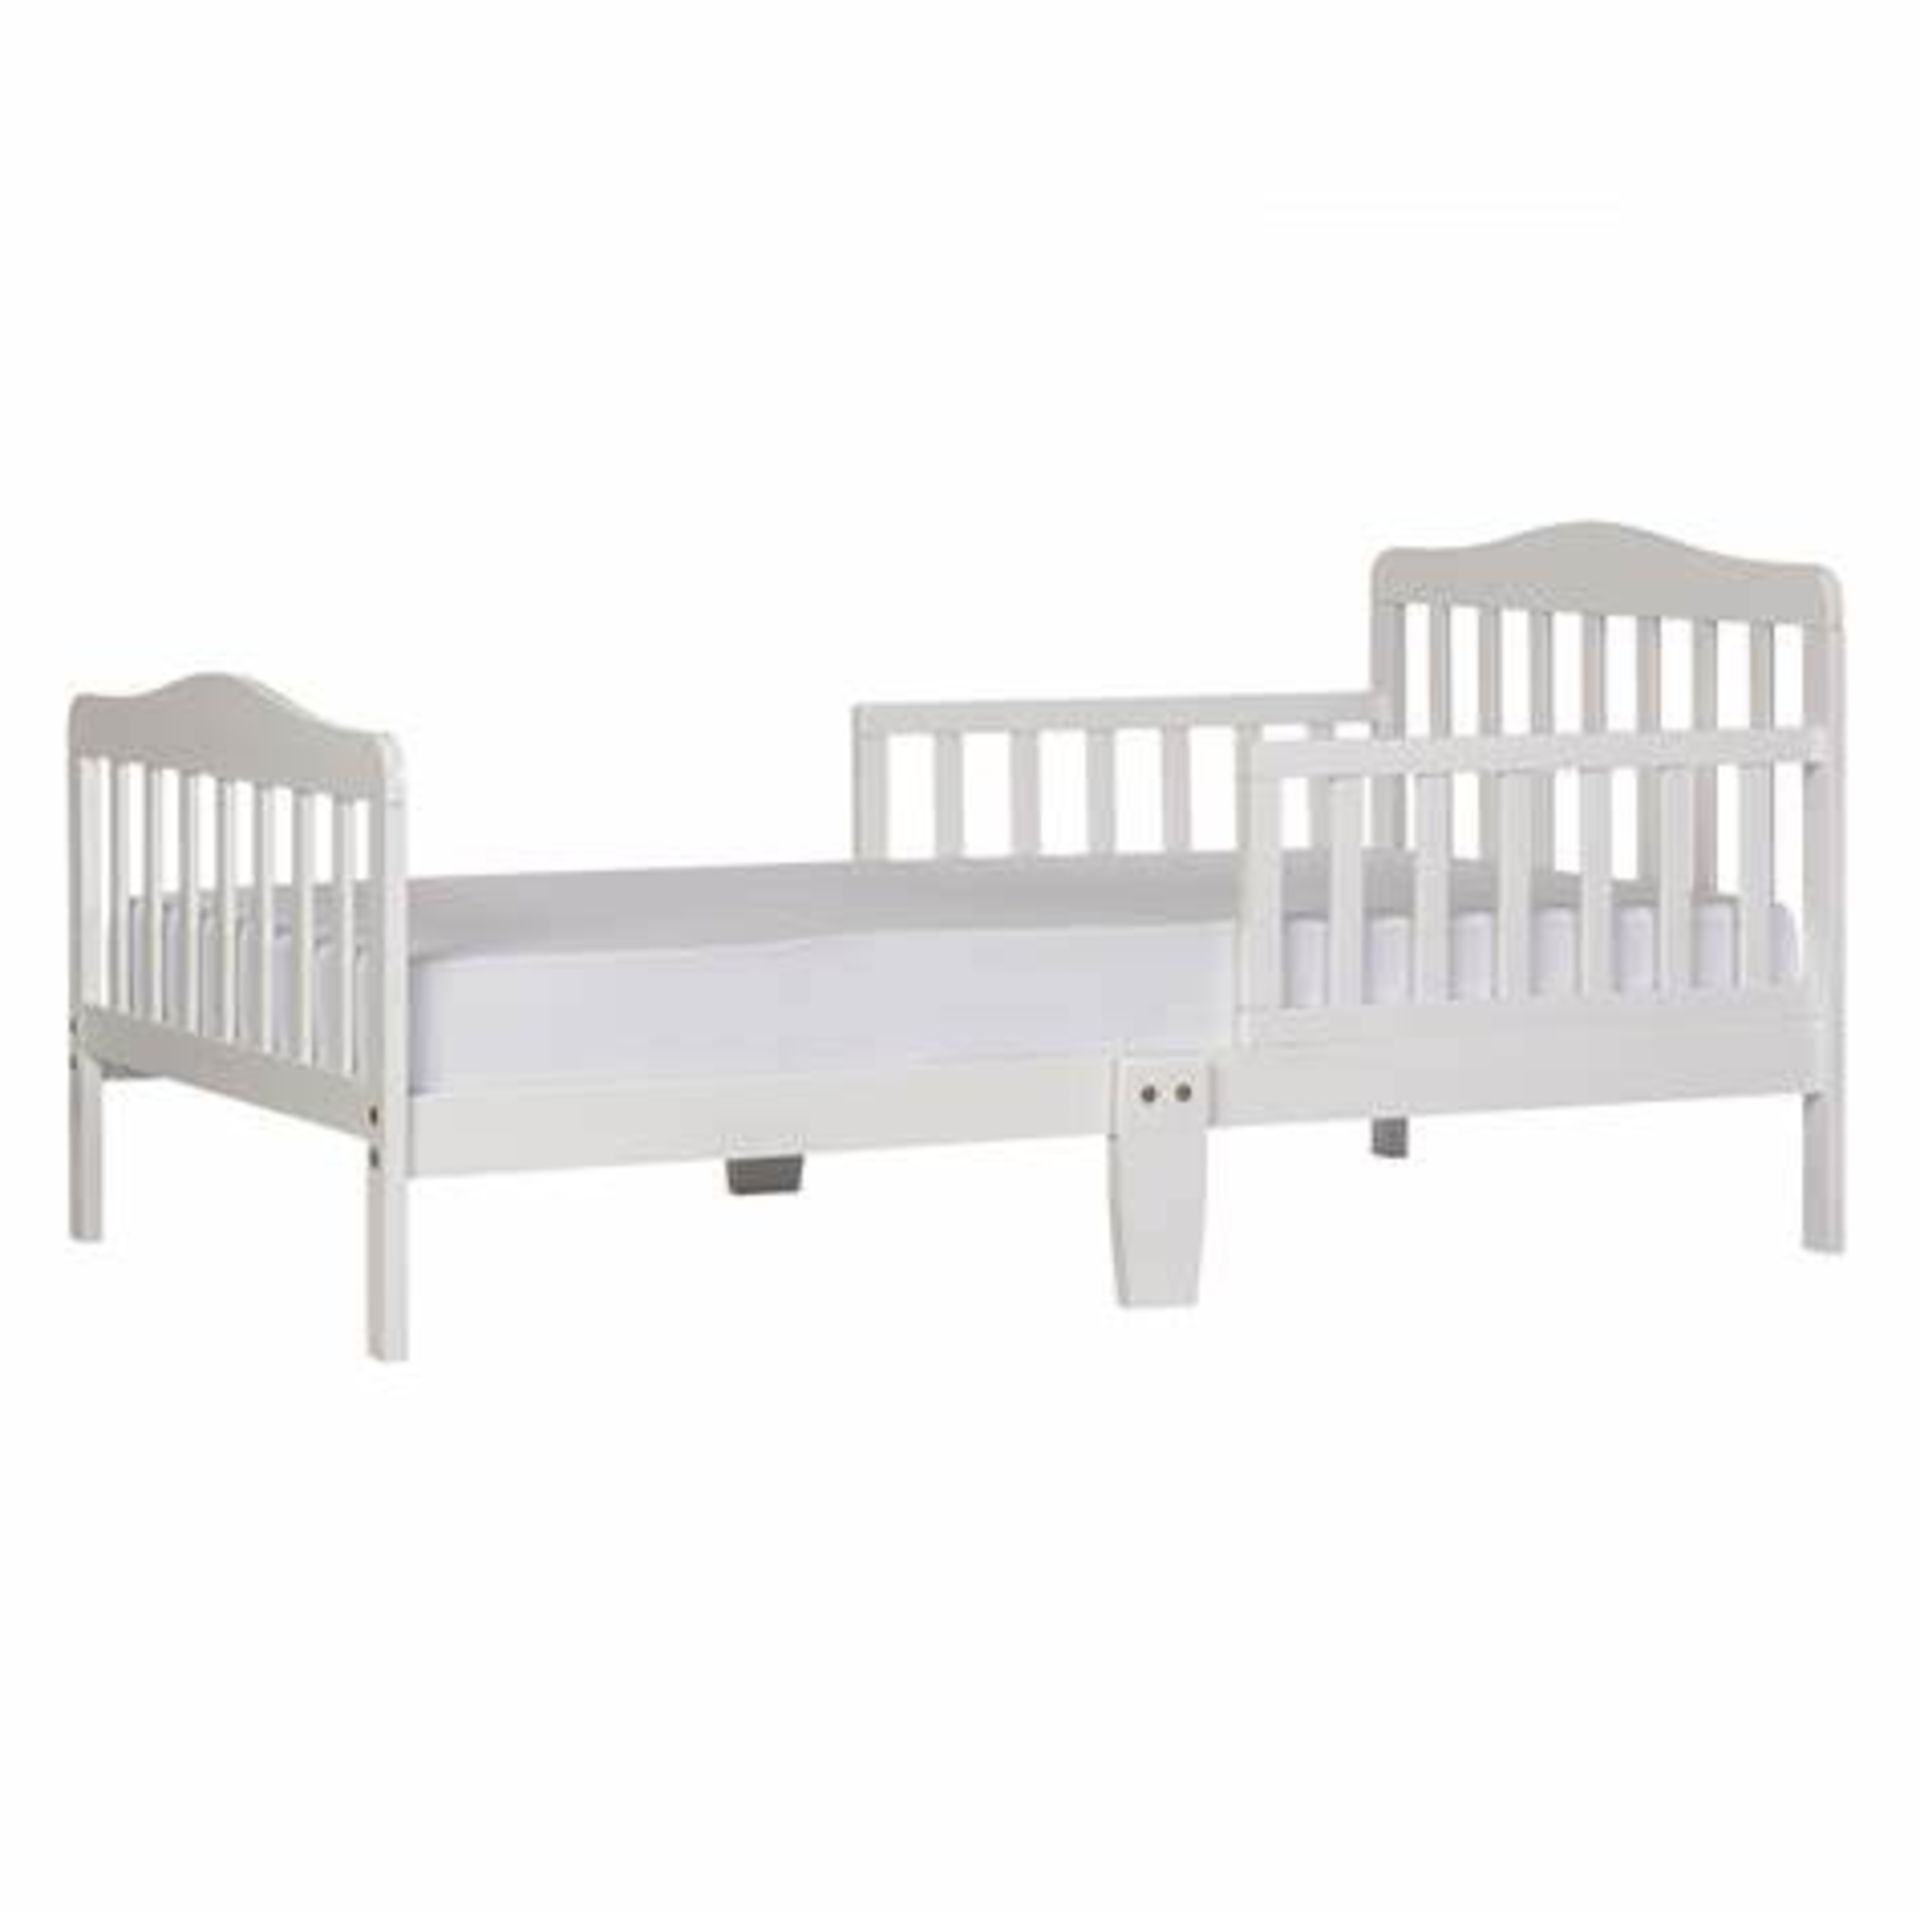 20 X Brand New Dream on Me Classic Toddler BedS. Product dimensionS - 144.8L x 71.1W x 76.2H CM - Bild 3 aus 4